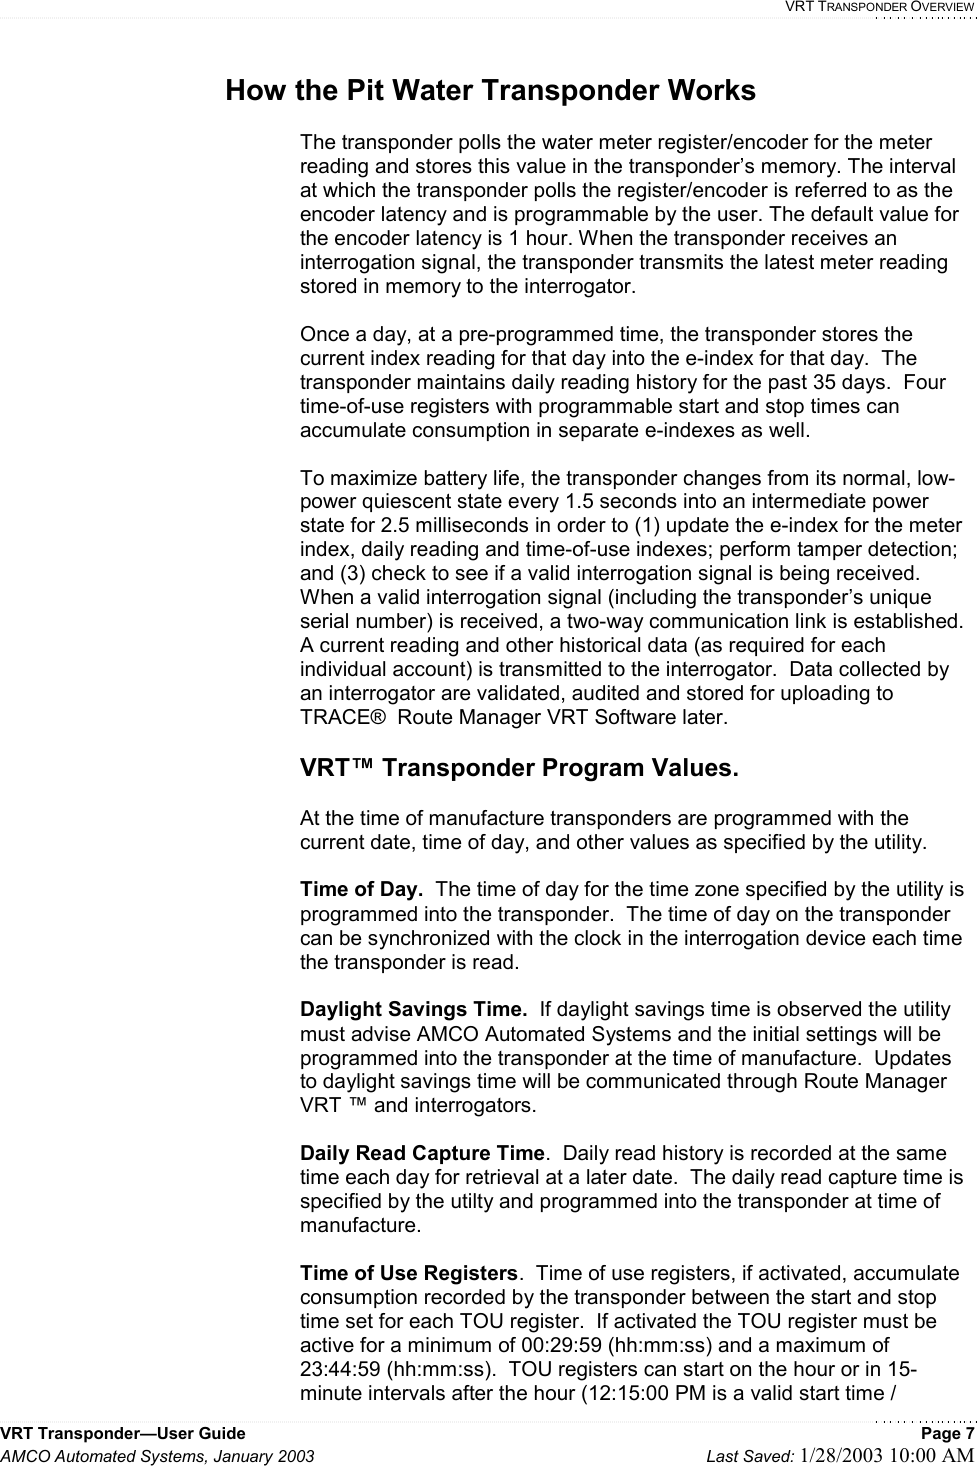   VRT TRANSPONDER OVERVIEW VRT Transponder—User Guide    Page 7 AMCO Automated Systems, January 2003    Last Saved: 1/28/2003 10:00 AM  How the Pit Water Transponder Works  The transponder polls the water meter register/encoder for the meter reading and stores this value in the transponder’s memory. The interval at which the transponder polls the register/encoder is referred to as the encoder latency and is programmable by the user. The default value for the encoder latency is 1 hour. When the transponder receives an interrogation signal, the transponder transmits the latest meter reading stored in memory to the interrogator.  Once a day, at a pre-programmed time, the transponder stores the current index reading for that day into the e-index for that day.  The transponder maintains daily reading history for the past 35 days.  Four time-of-use registers with programmable start and stop times can accumulate consumption in separate e-indexes as well.  To maximize battery life, the transponder changes from its normal, low-power quiescent state every 1.5 seconds into an intermediate power state for 2.5 milliseconds in order to (1) update the e-index for the meter index, daily reading and time-of-use indexes; perform tamper detection; and (3) check to see if a valid interrogation signal is being received.  When a valid interrogation signal (including the transponder’s unique serial number) is received, a two-way communication link is established.  A current reading and other historical data (as required for each individual account) is transmitted to the interrogator.  Data collected by an interrogator are validated, audited and stored for uploading to TRACE®  Route Manager VRT Software later.   VRT™ Transponder Program Values.  At the time of manufacture transponders are programmed with the current date, time of day, and other values as specified by the utility.    Time of Day.  The time of day for the time zone specified by the utility is programmed into the transponder.  The time of day on the transponder can be synchronized with the clock in the interrogation device each time the transponder is read.  Daylight Savings Time.  If daylight savings time is observed the utility must advise AMCO Automated Systems and the initial settings will be programmed into the transponder at the time of manufacture.  Updates to daylight savings time will be communicated through Route Manager VRT ™ and interrogators.  Daily Read Capture Time.  Daily read history is recorded at the same time each day for retrieval at a later date.  The daily read capture time is specified by the utilty and programmed into the transponder at time of manufacture.  Time of Use Registers.  Time of use registers, if activated, accumulate consumption recorded by the transponder between the start and stop time set for each TOU register.  If activated the TOU register must be active for a minimum of 00:29:59 (hh:mm:ss) and a maximum of 23:44:59 (hh:mm:ss).  TOU registers can start on the hour or in 15-minute intervals after the hour (12:15:00 PM is a valid start time / 